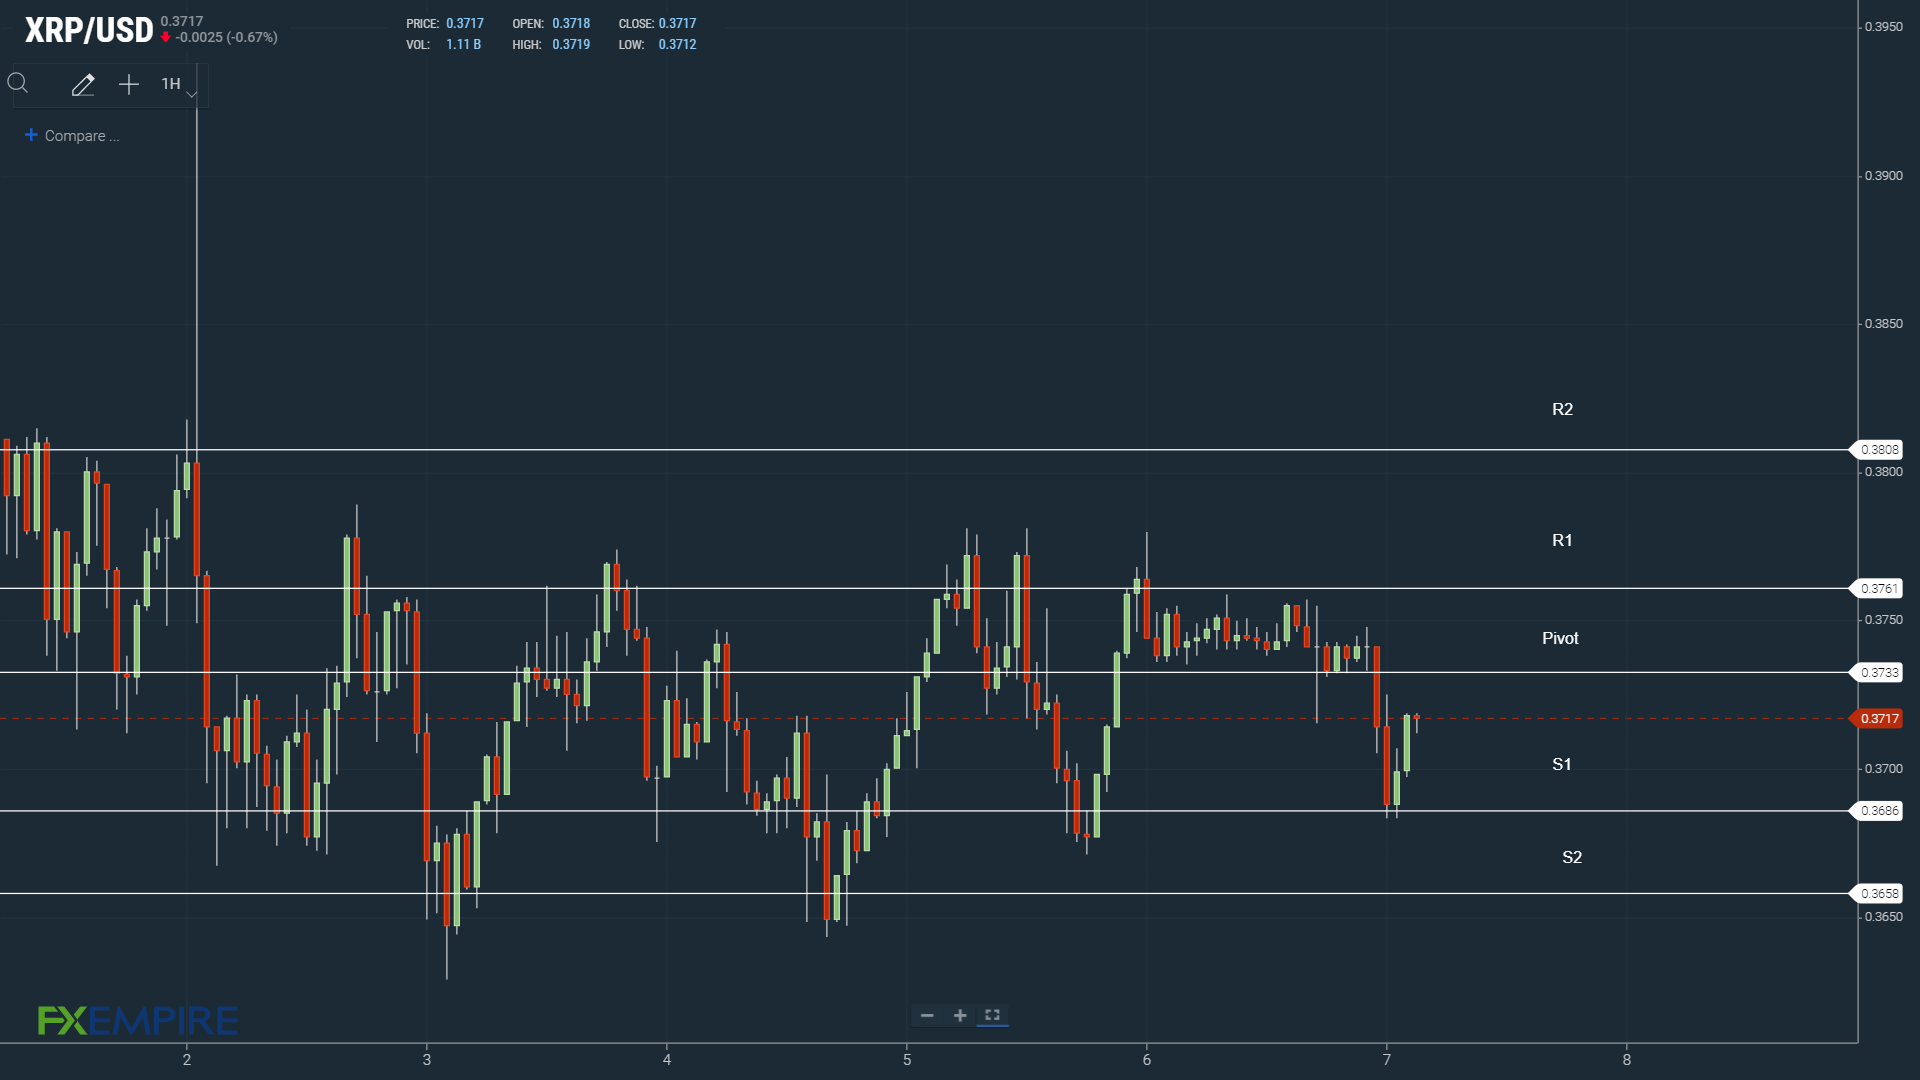 XRP support levels tested early.